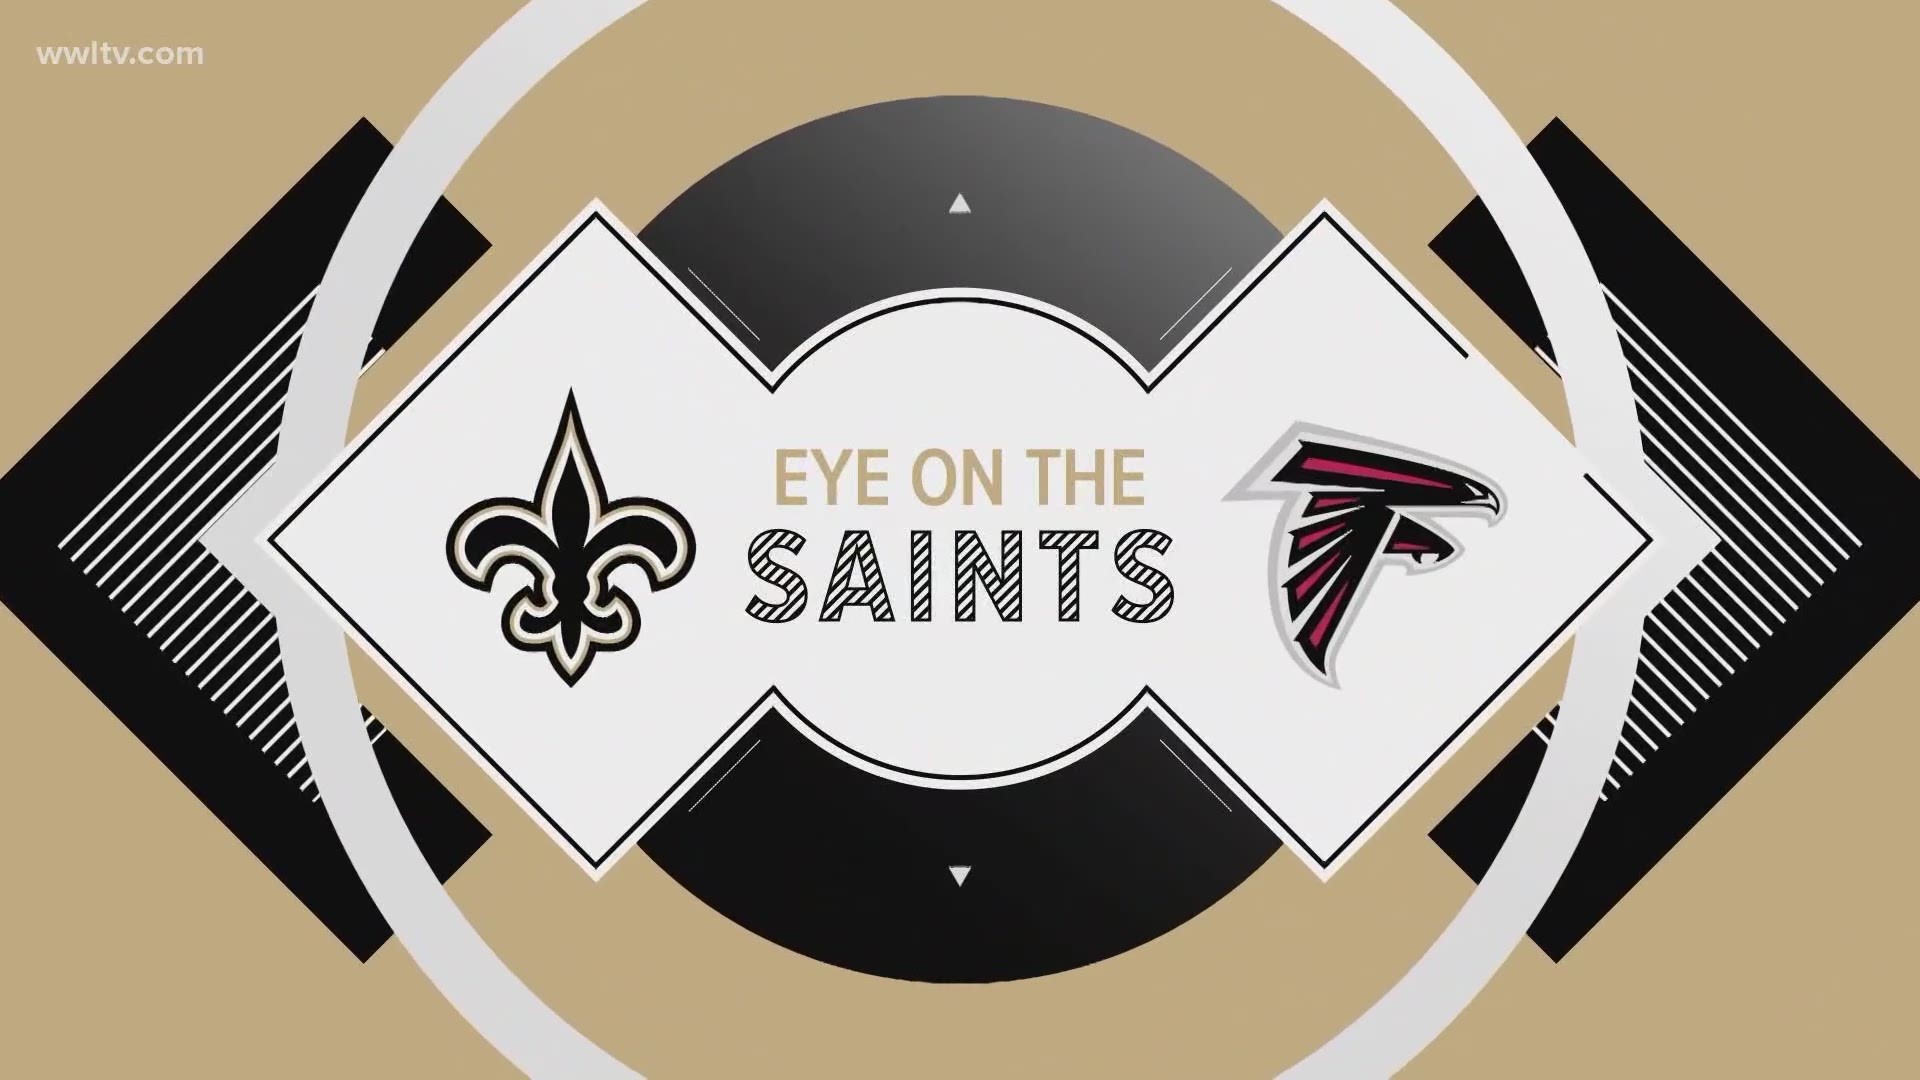 The New Orleans Saints are in the playoffs for the fourth straight season for the first time in franchise history. The Golden Age of Saints football is incredible.